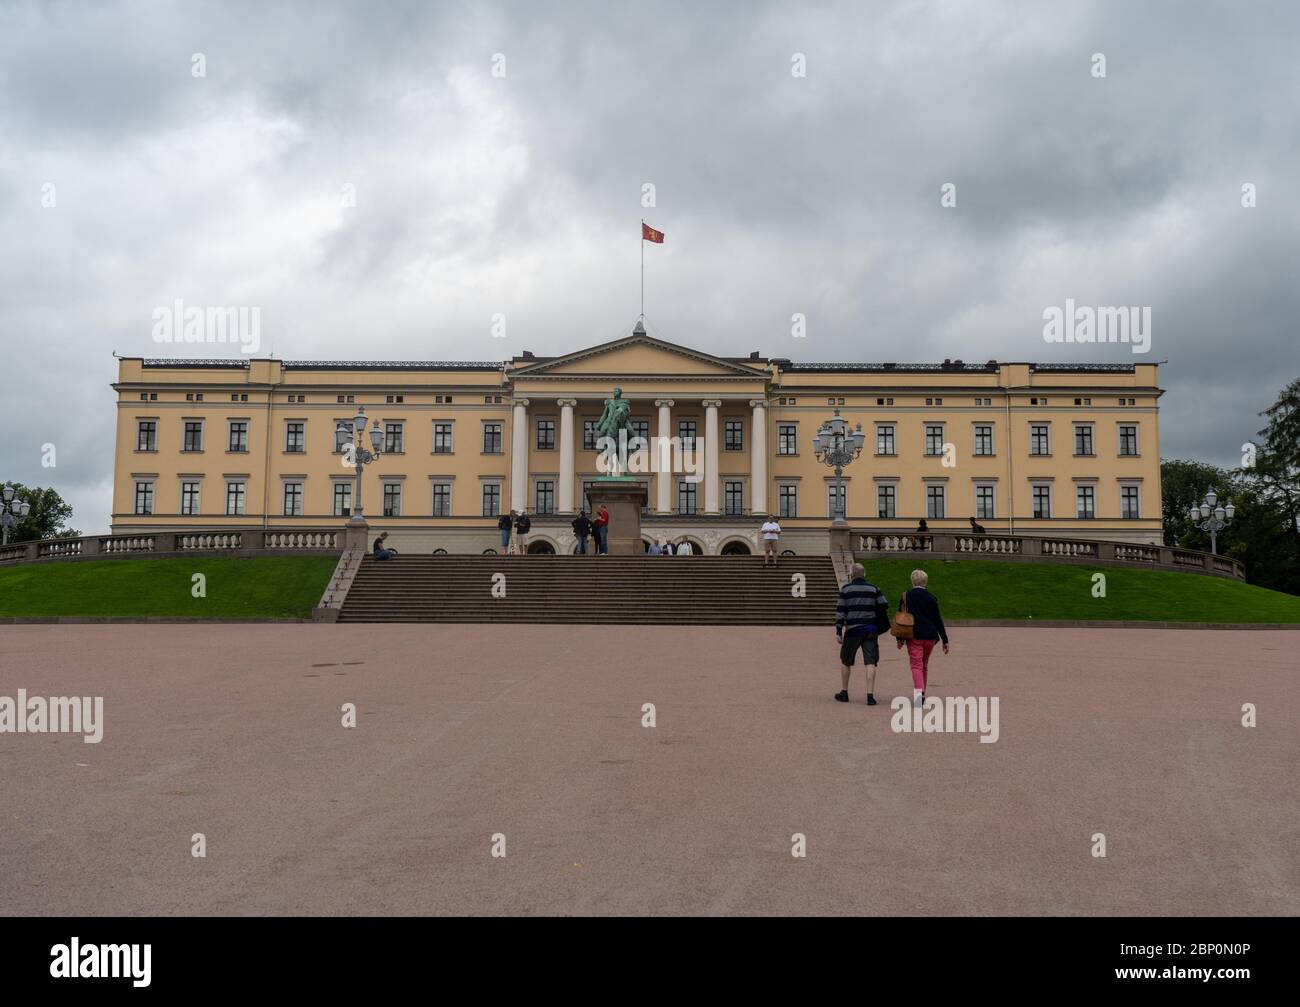 August 2019. People walking around The Royal Palace of Oslo in Norway. Stock Photo